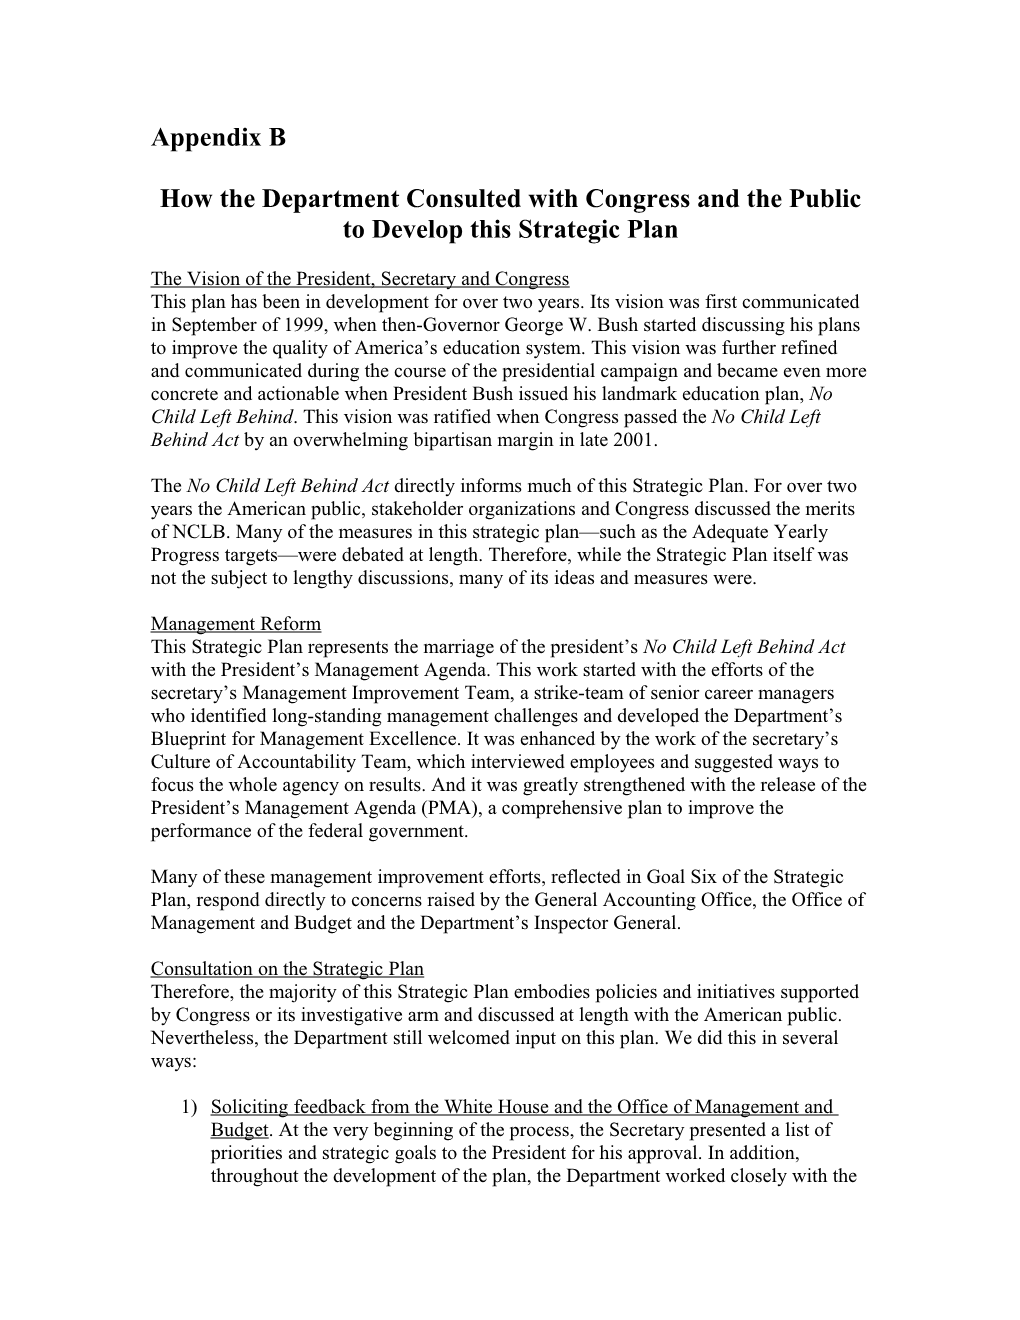 How the Department Consulted with Congress and the Public to Develop This Strategic Plan